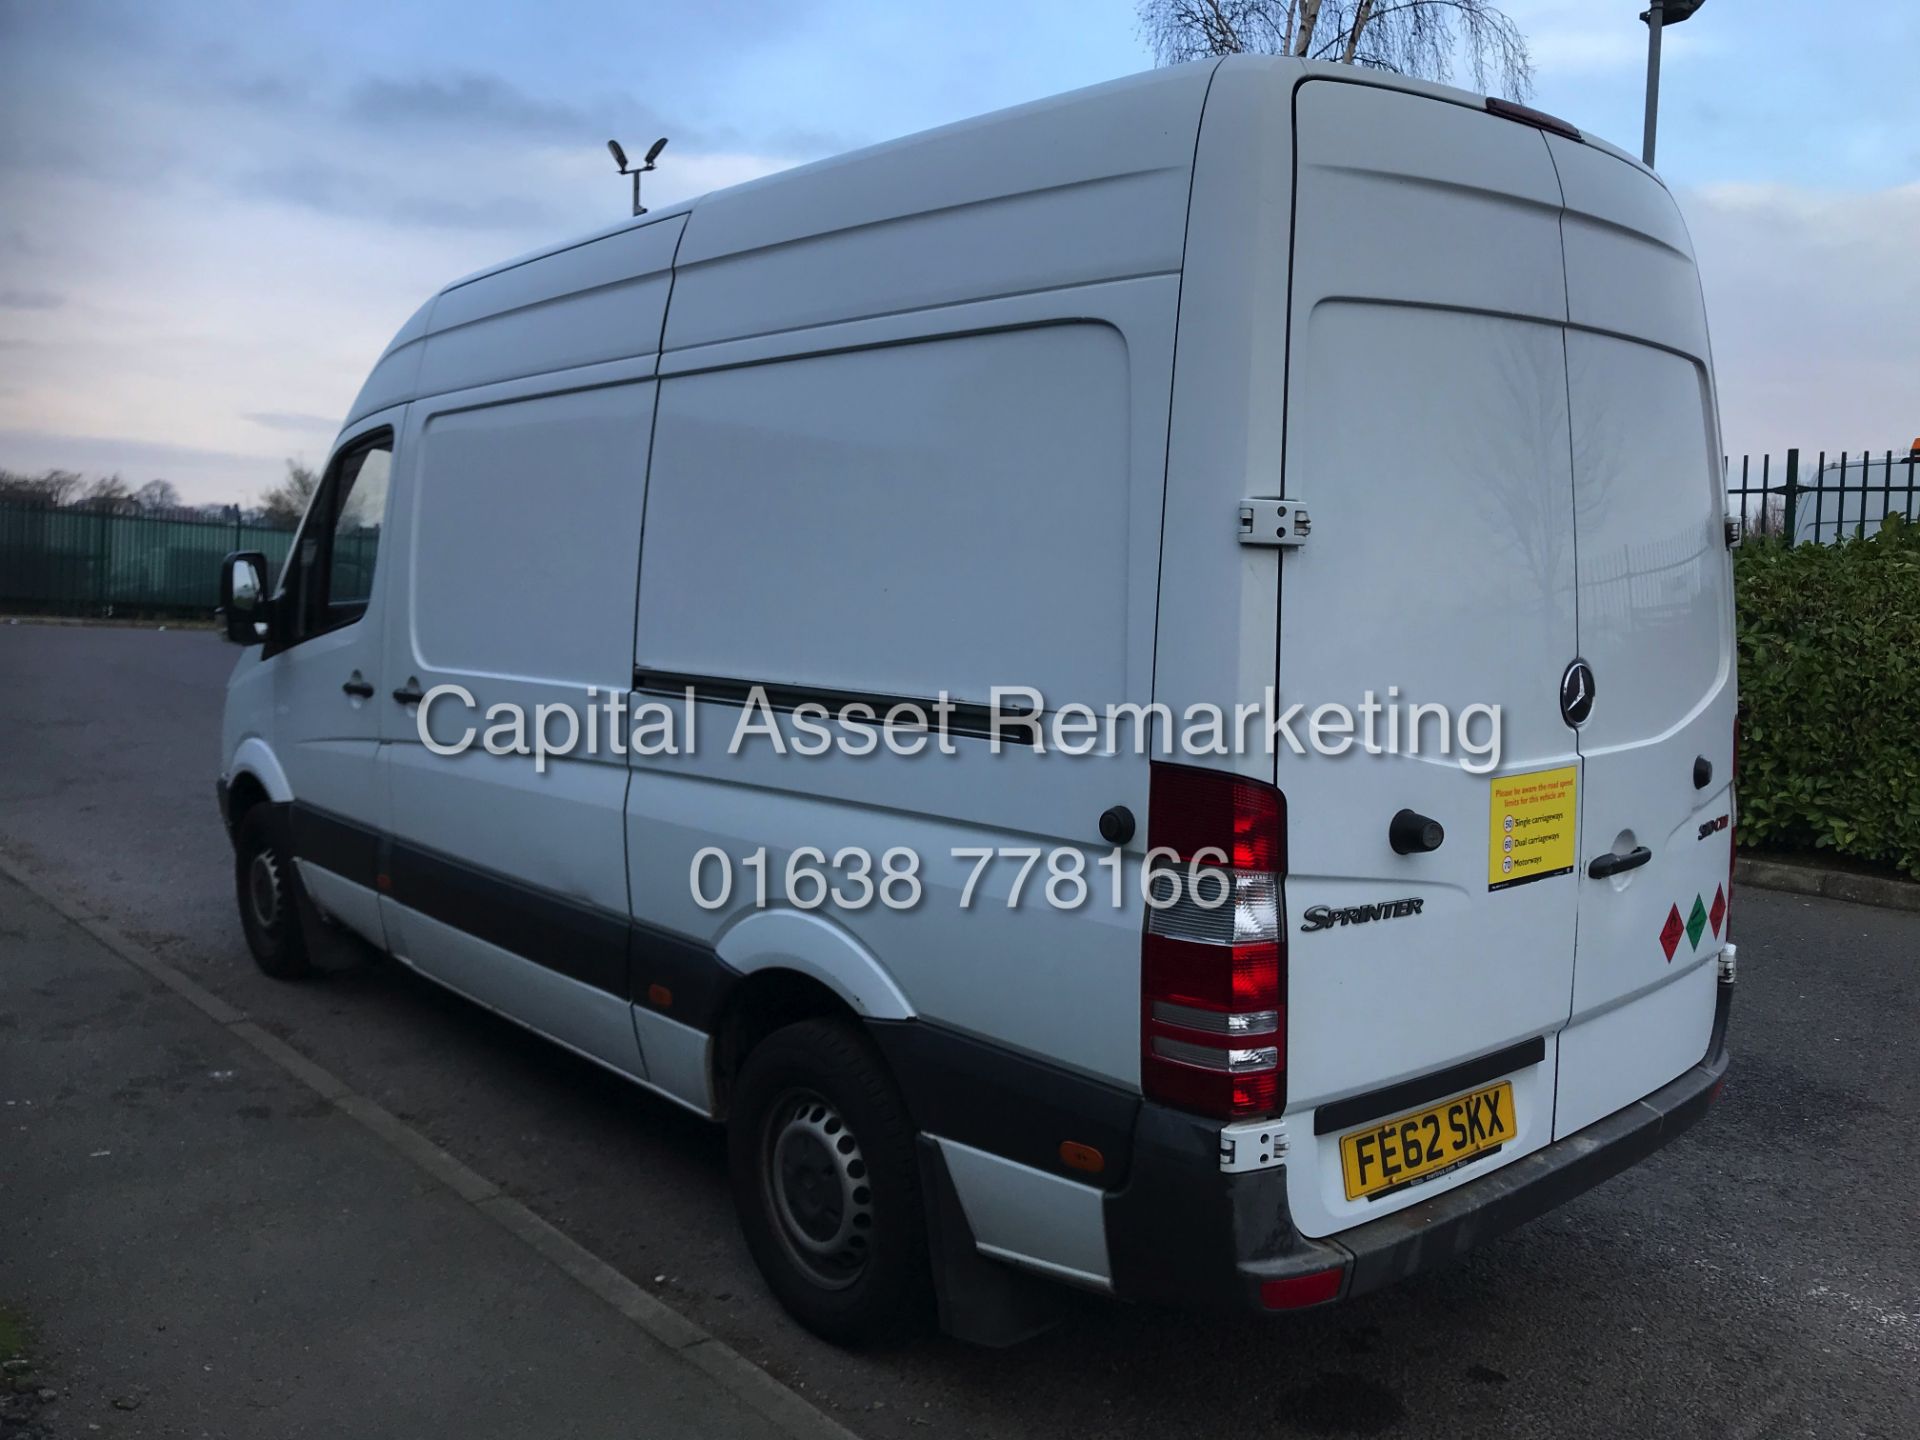 (ON SALE) MERCEDES SPRINTER 2.2CDI MWB / HIGH ROOF (2013 MODEL) 1 OWNER - LOW MILES - Image 4 of 15